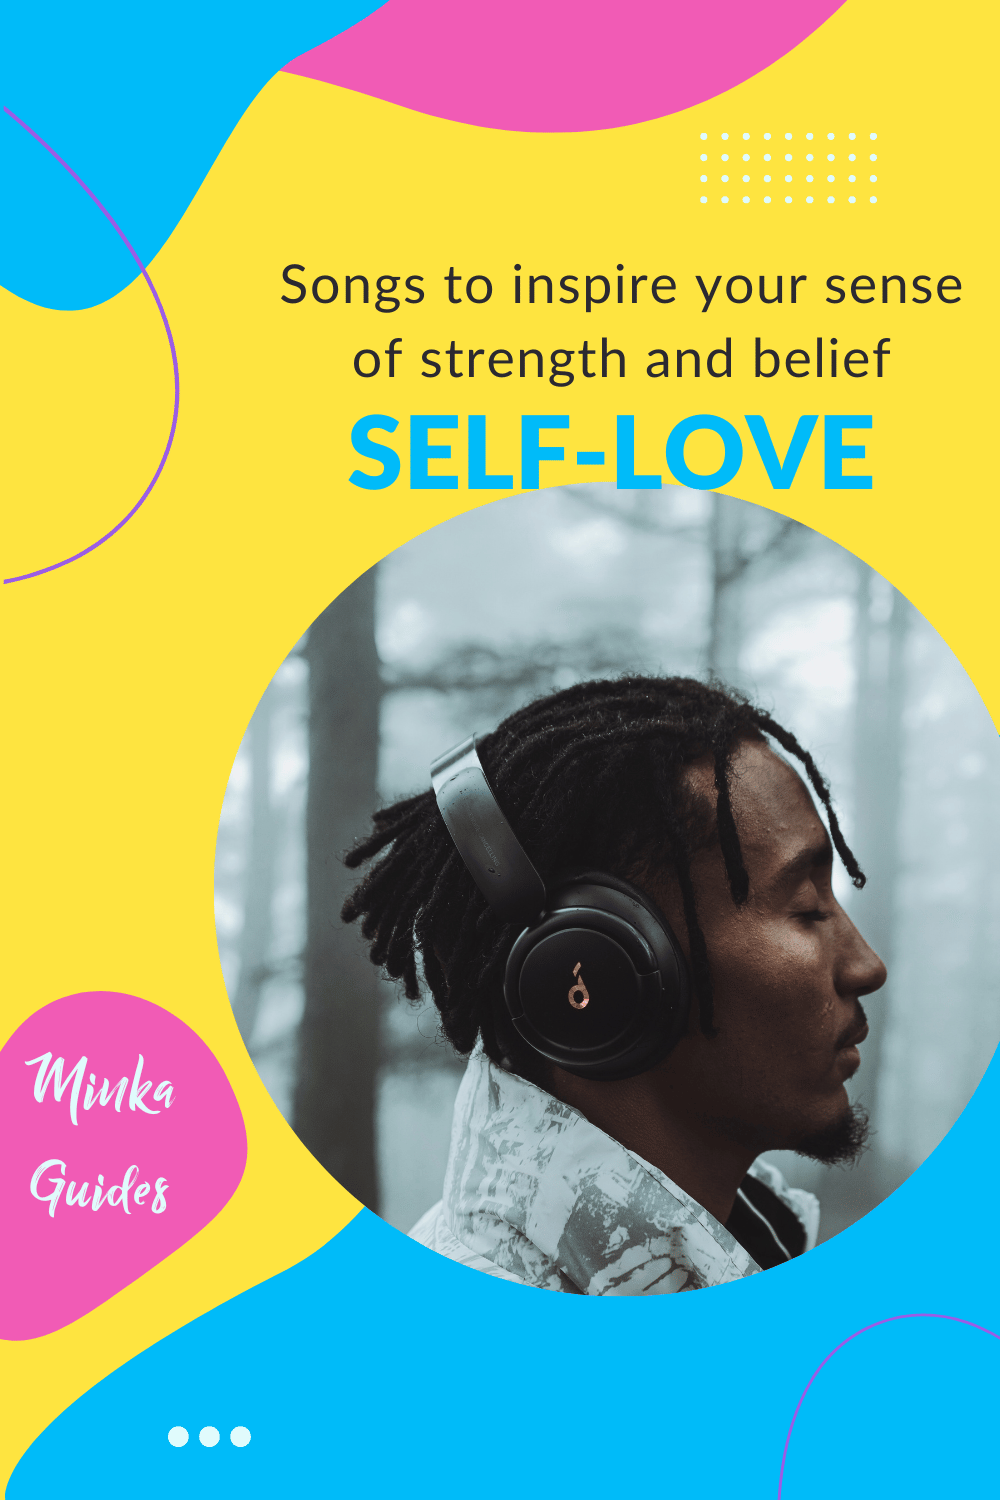 Songs about self love | Minka Guides